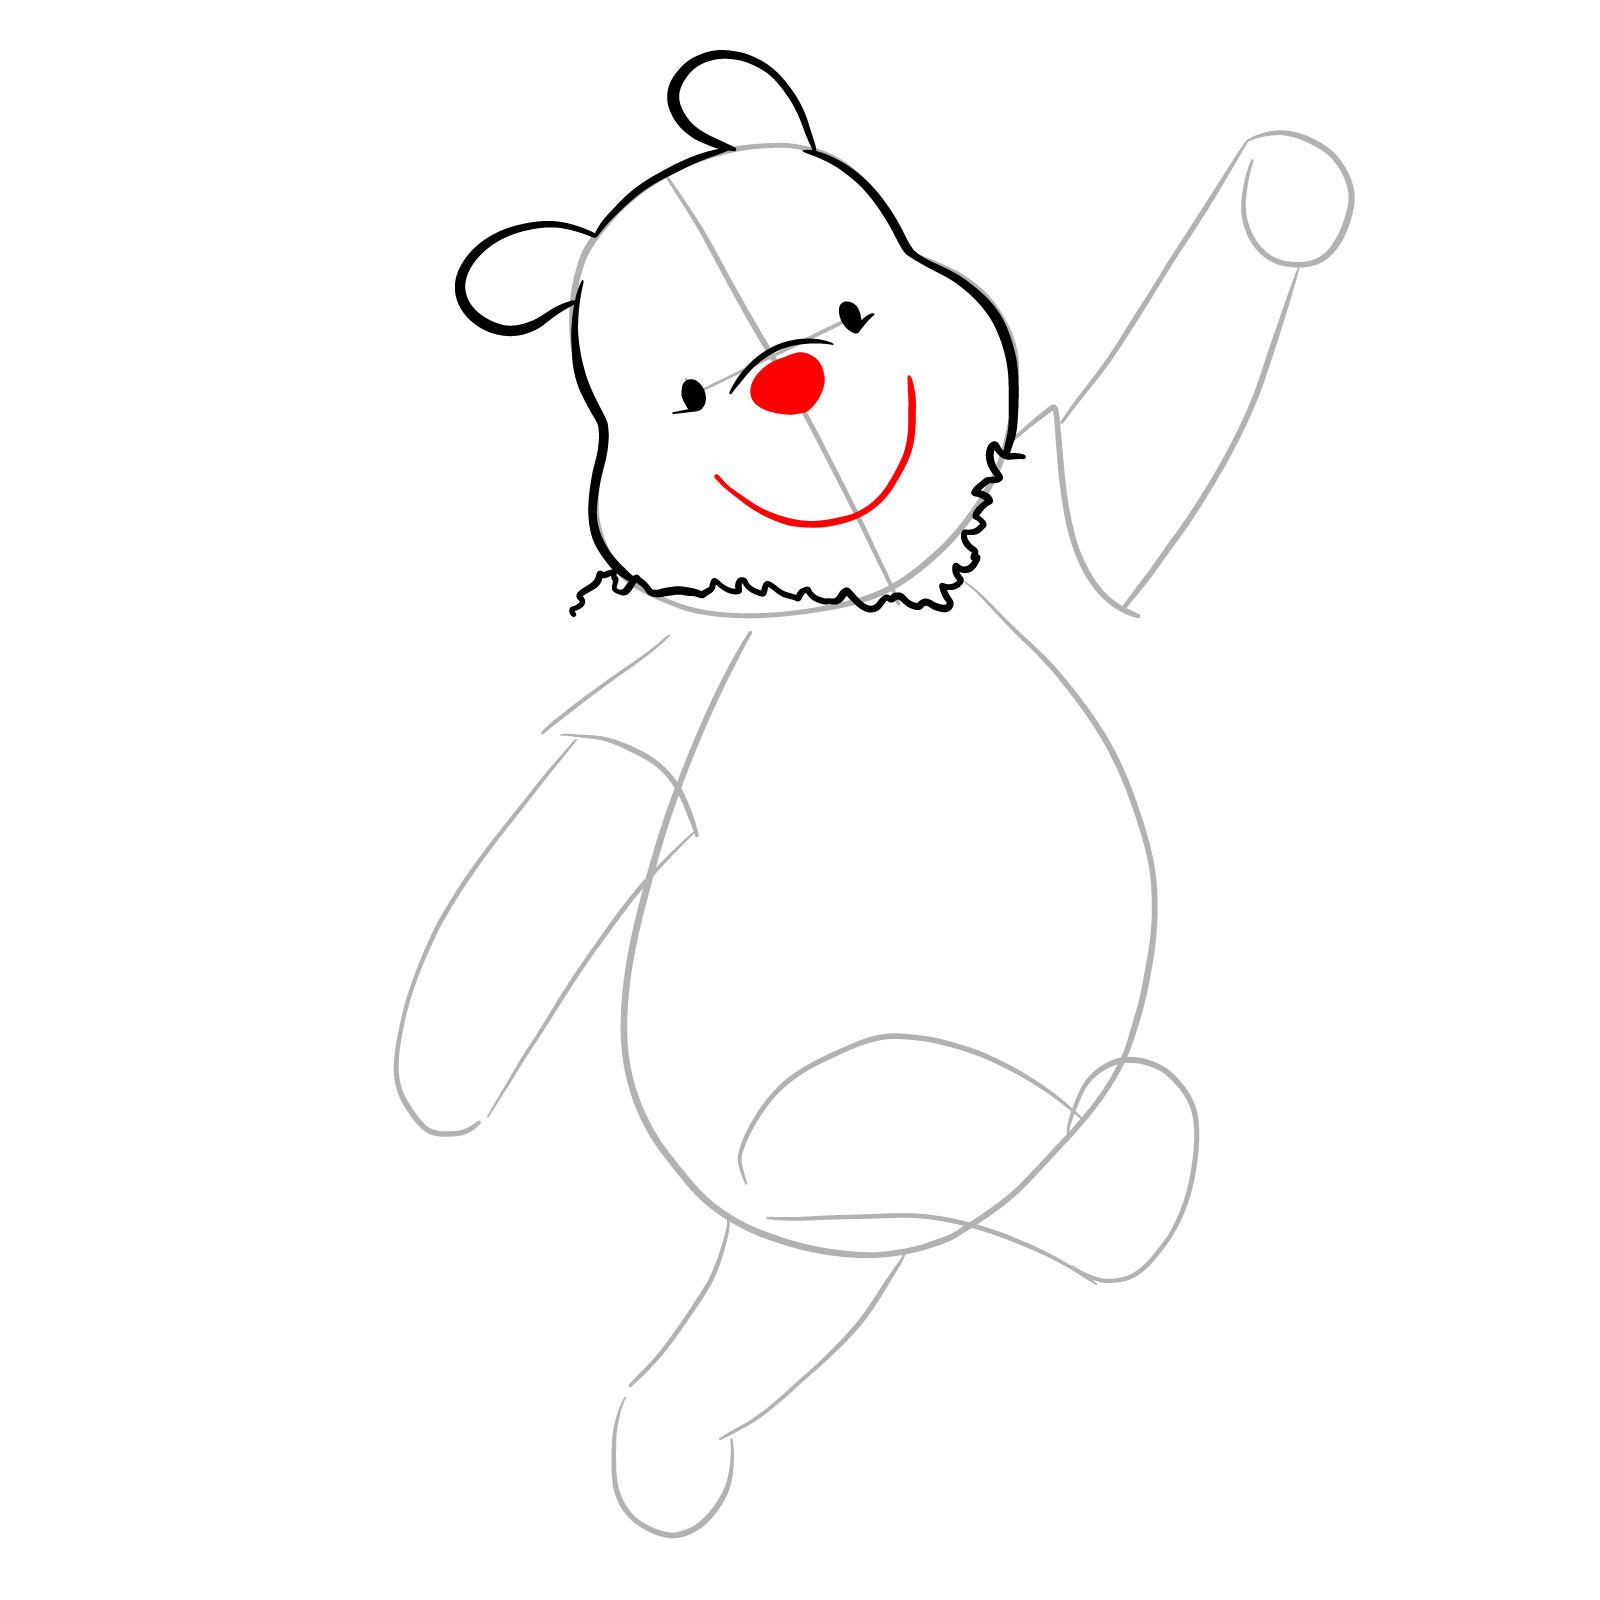 How to draw Winnie-the-Pooh Christmas style - step 08